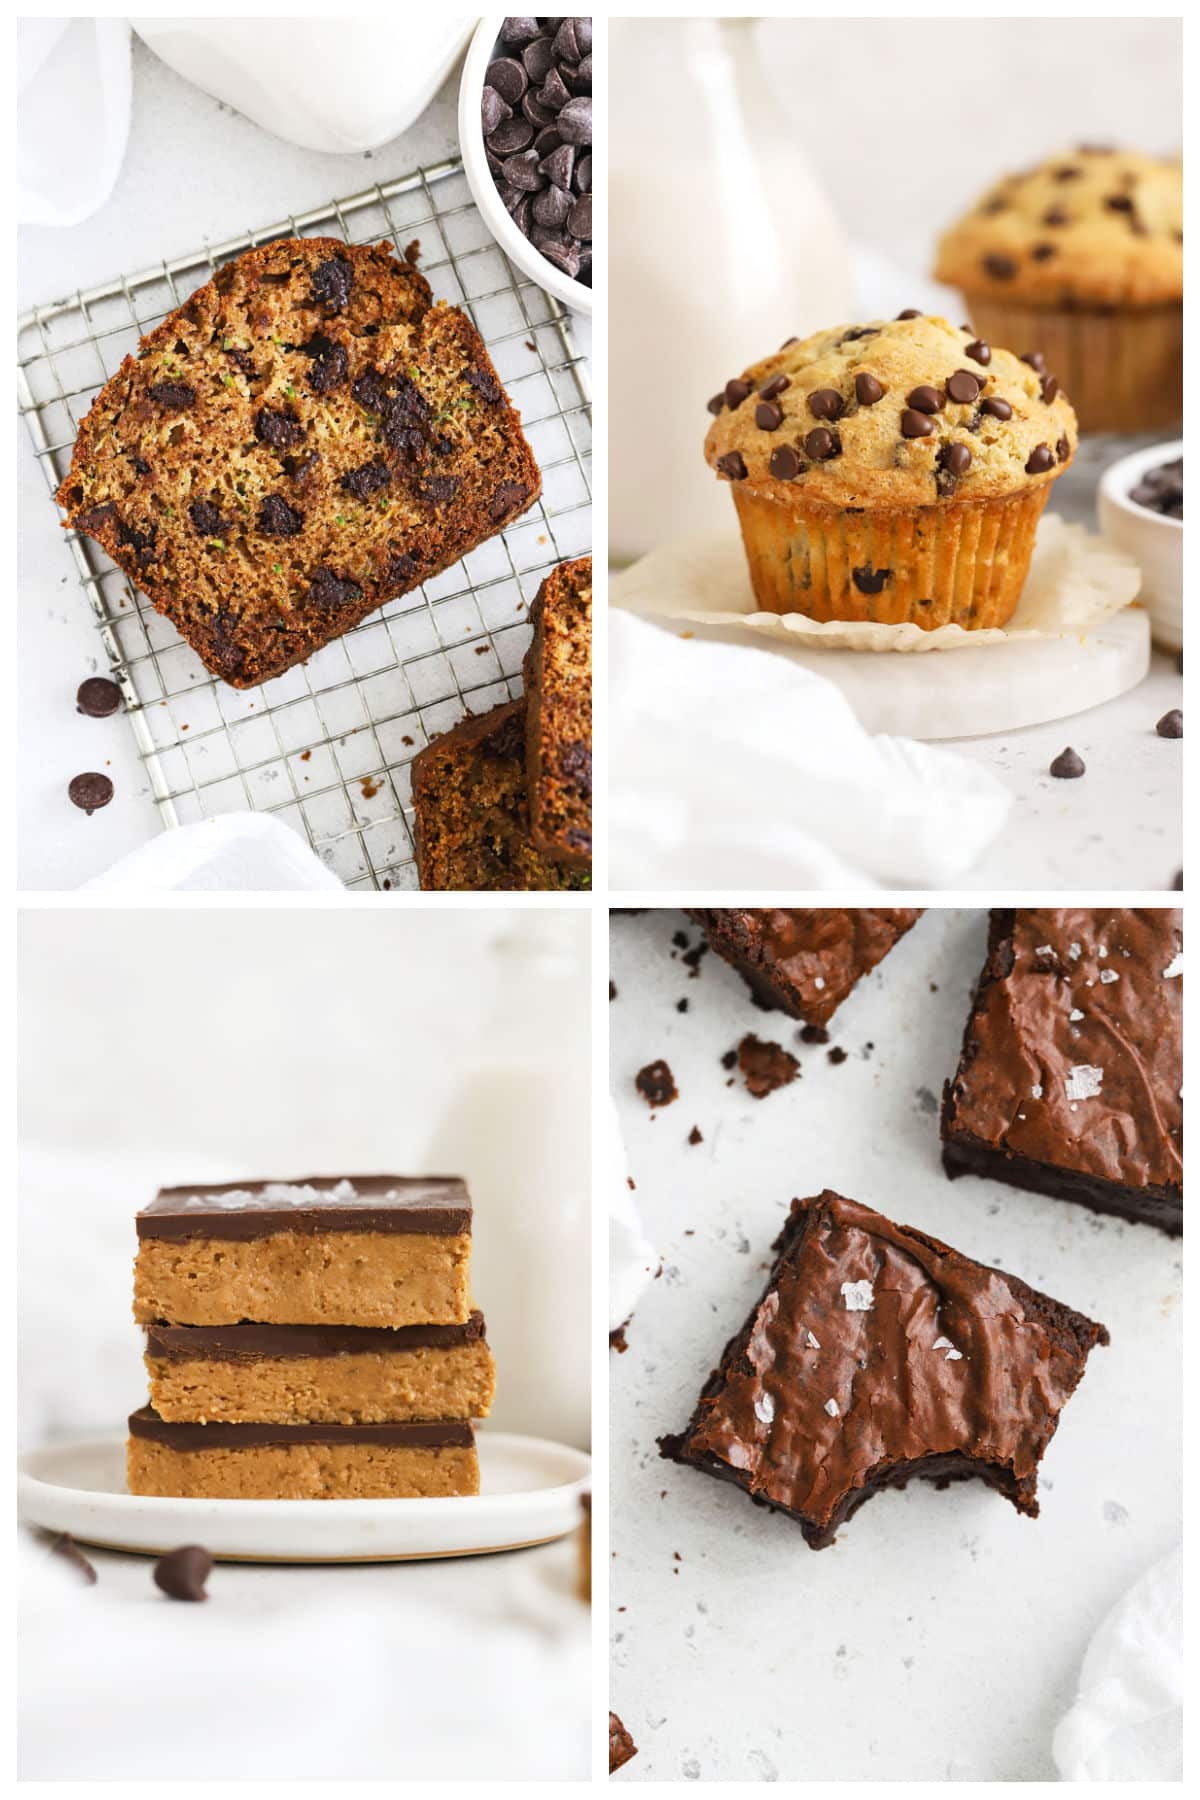 Have some chocolate chips on hand you need to use up? Here are 20+ recipes to make with chocolate chips besides cookies (though we also have some chocolate chip cookie, recipes, too!) These are great recipes to use chocolate chips and break out of a baking rut. From brownies and bars, to ice cream toppings, muffins, pudding, and more, there's a recipe for every occasion!